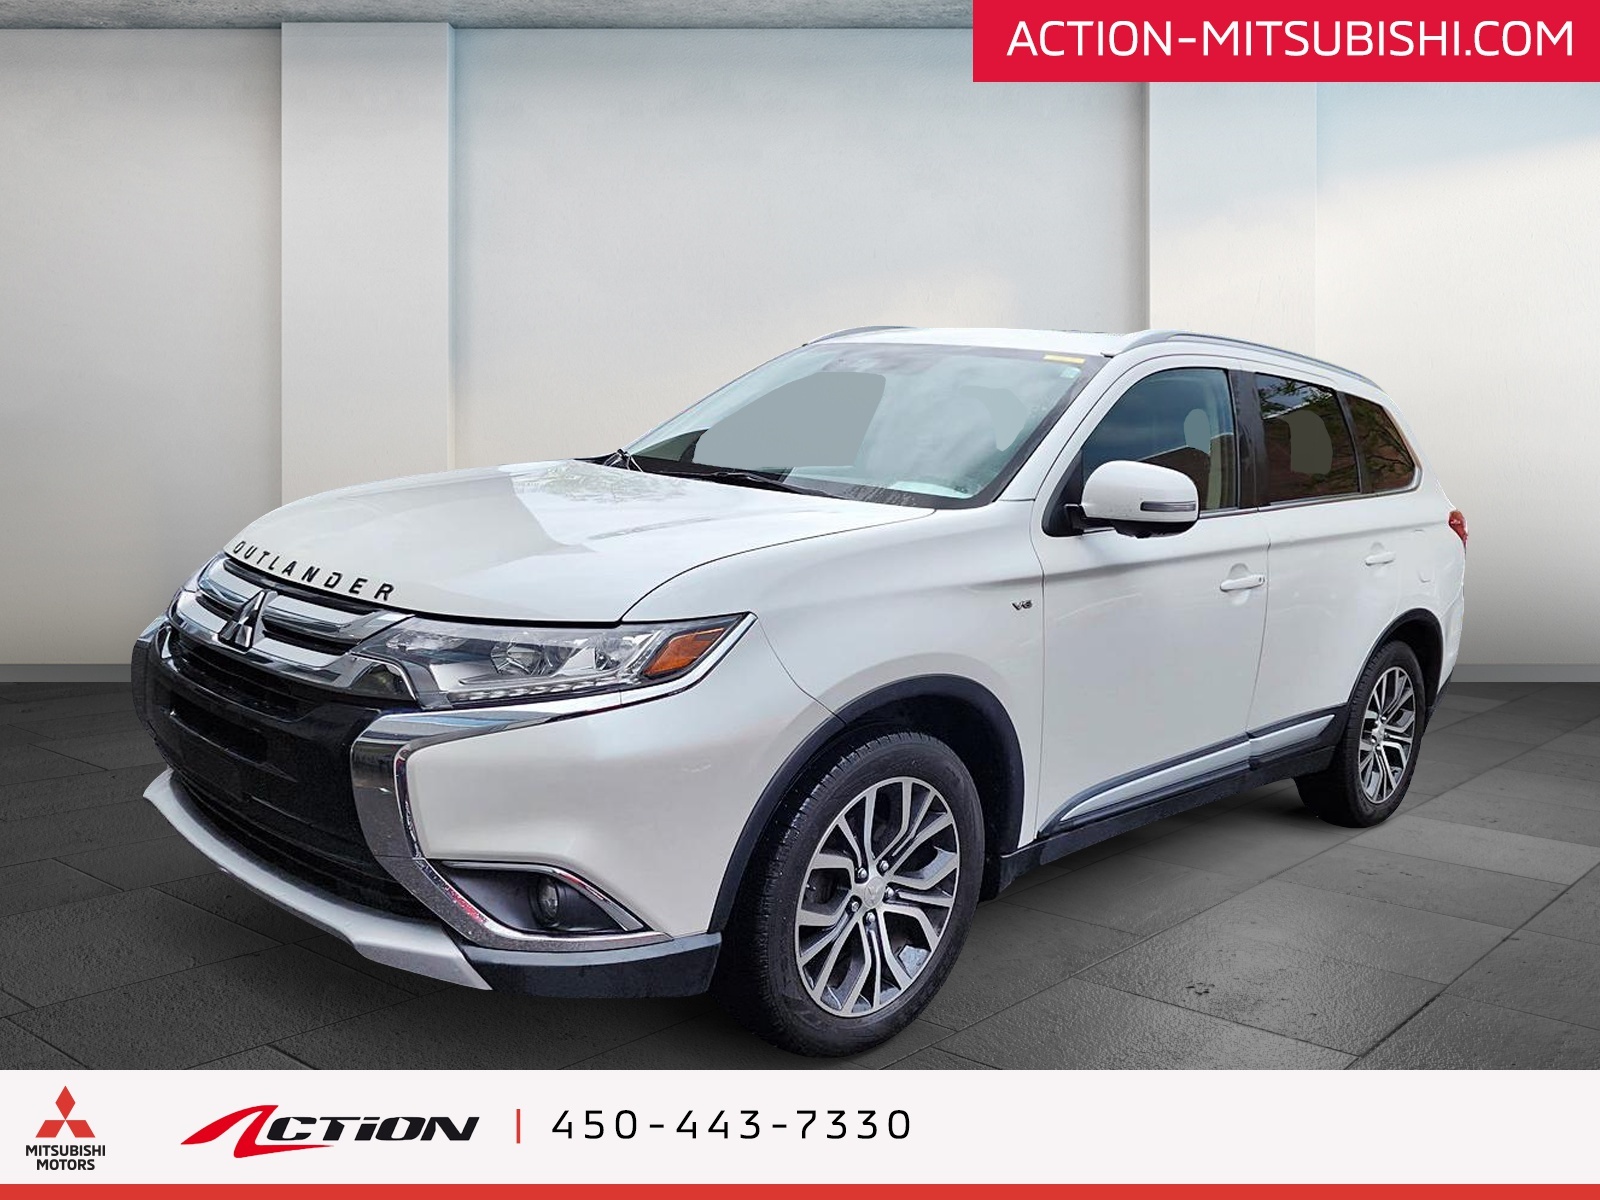 2018 Mitsubishi Outlander GT S-AWC+TOIT OUVRANT+BLUETOOTH+CUIR+MAGS\JANTES 